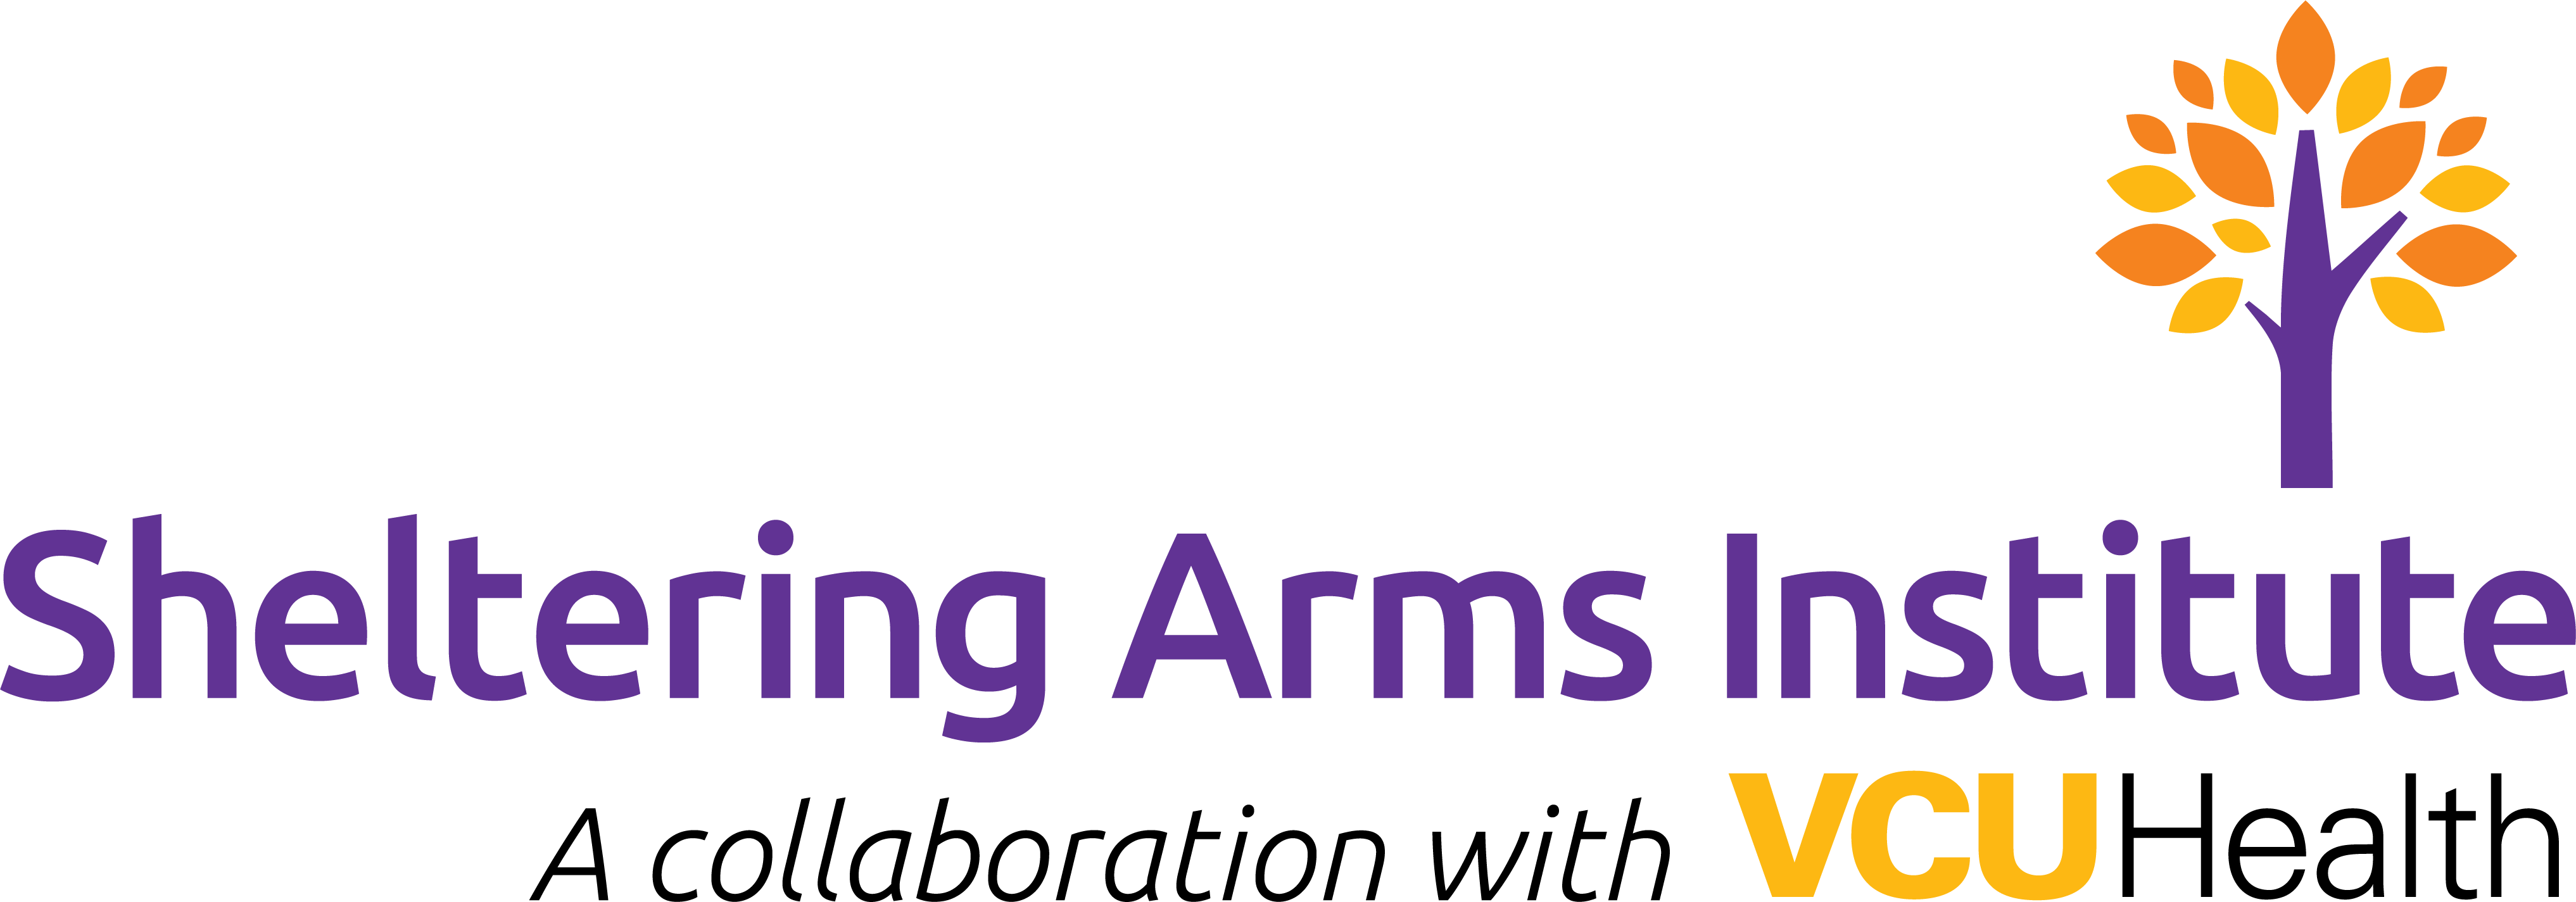 Sheltering Arms Institute Company Logo